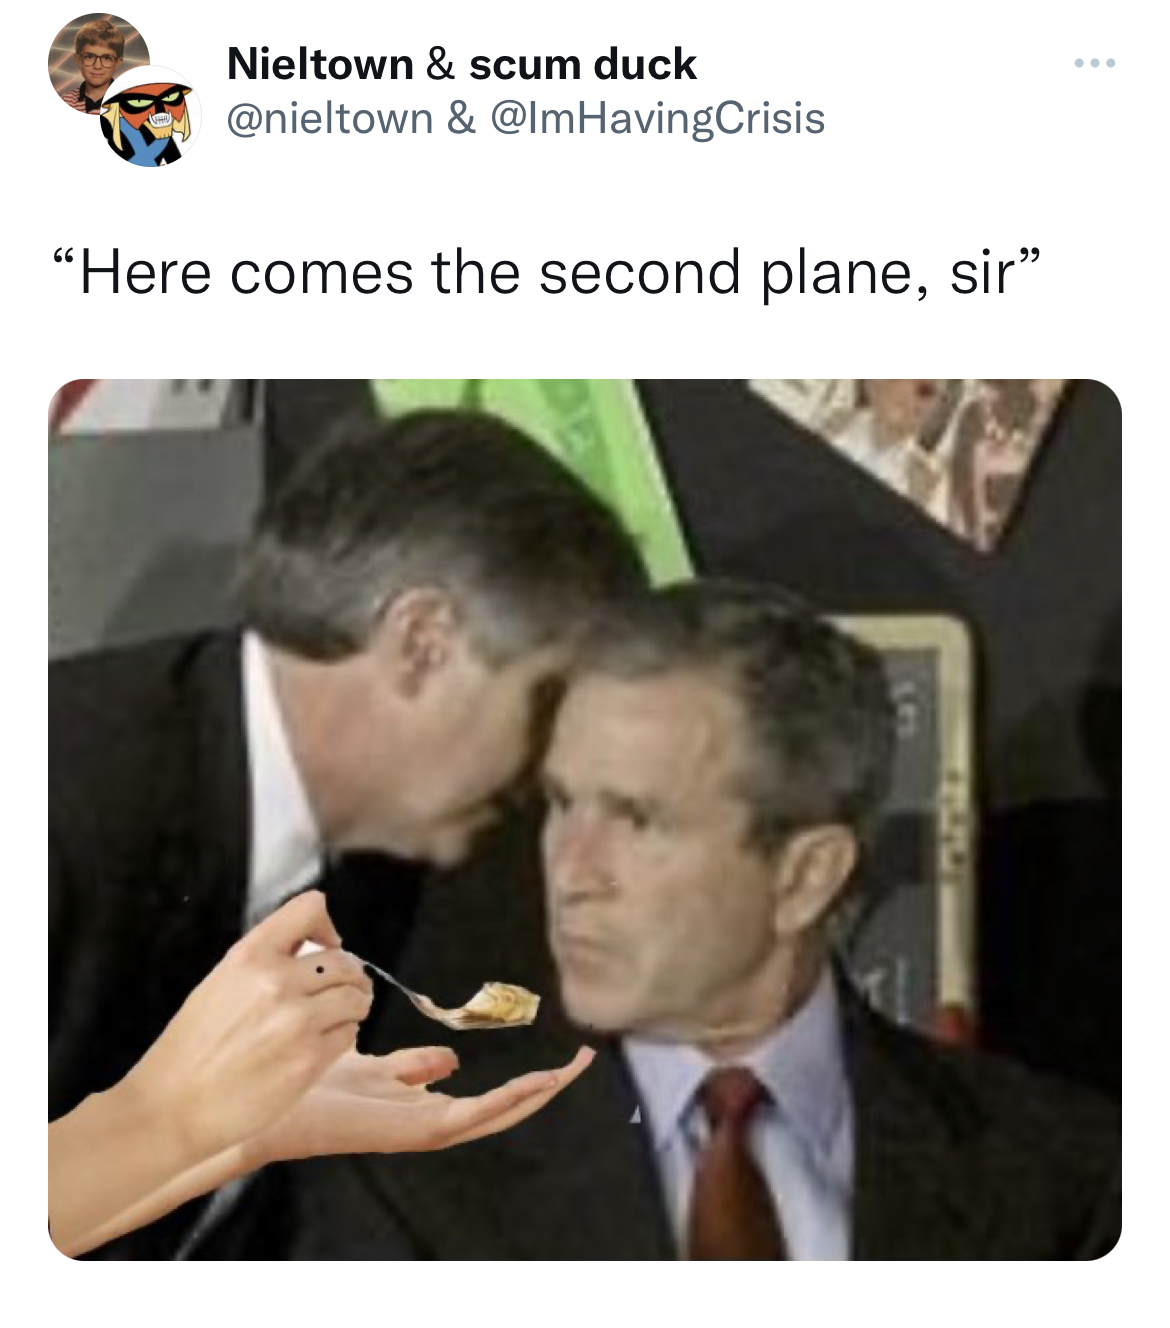 Tweets dunking on celebs - Nieltown & scum duck & "Here comes the second plane, sir"